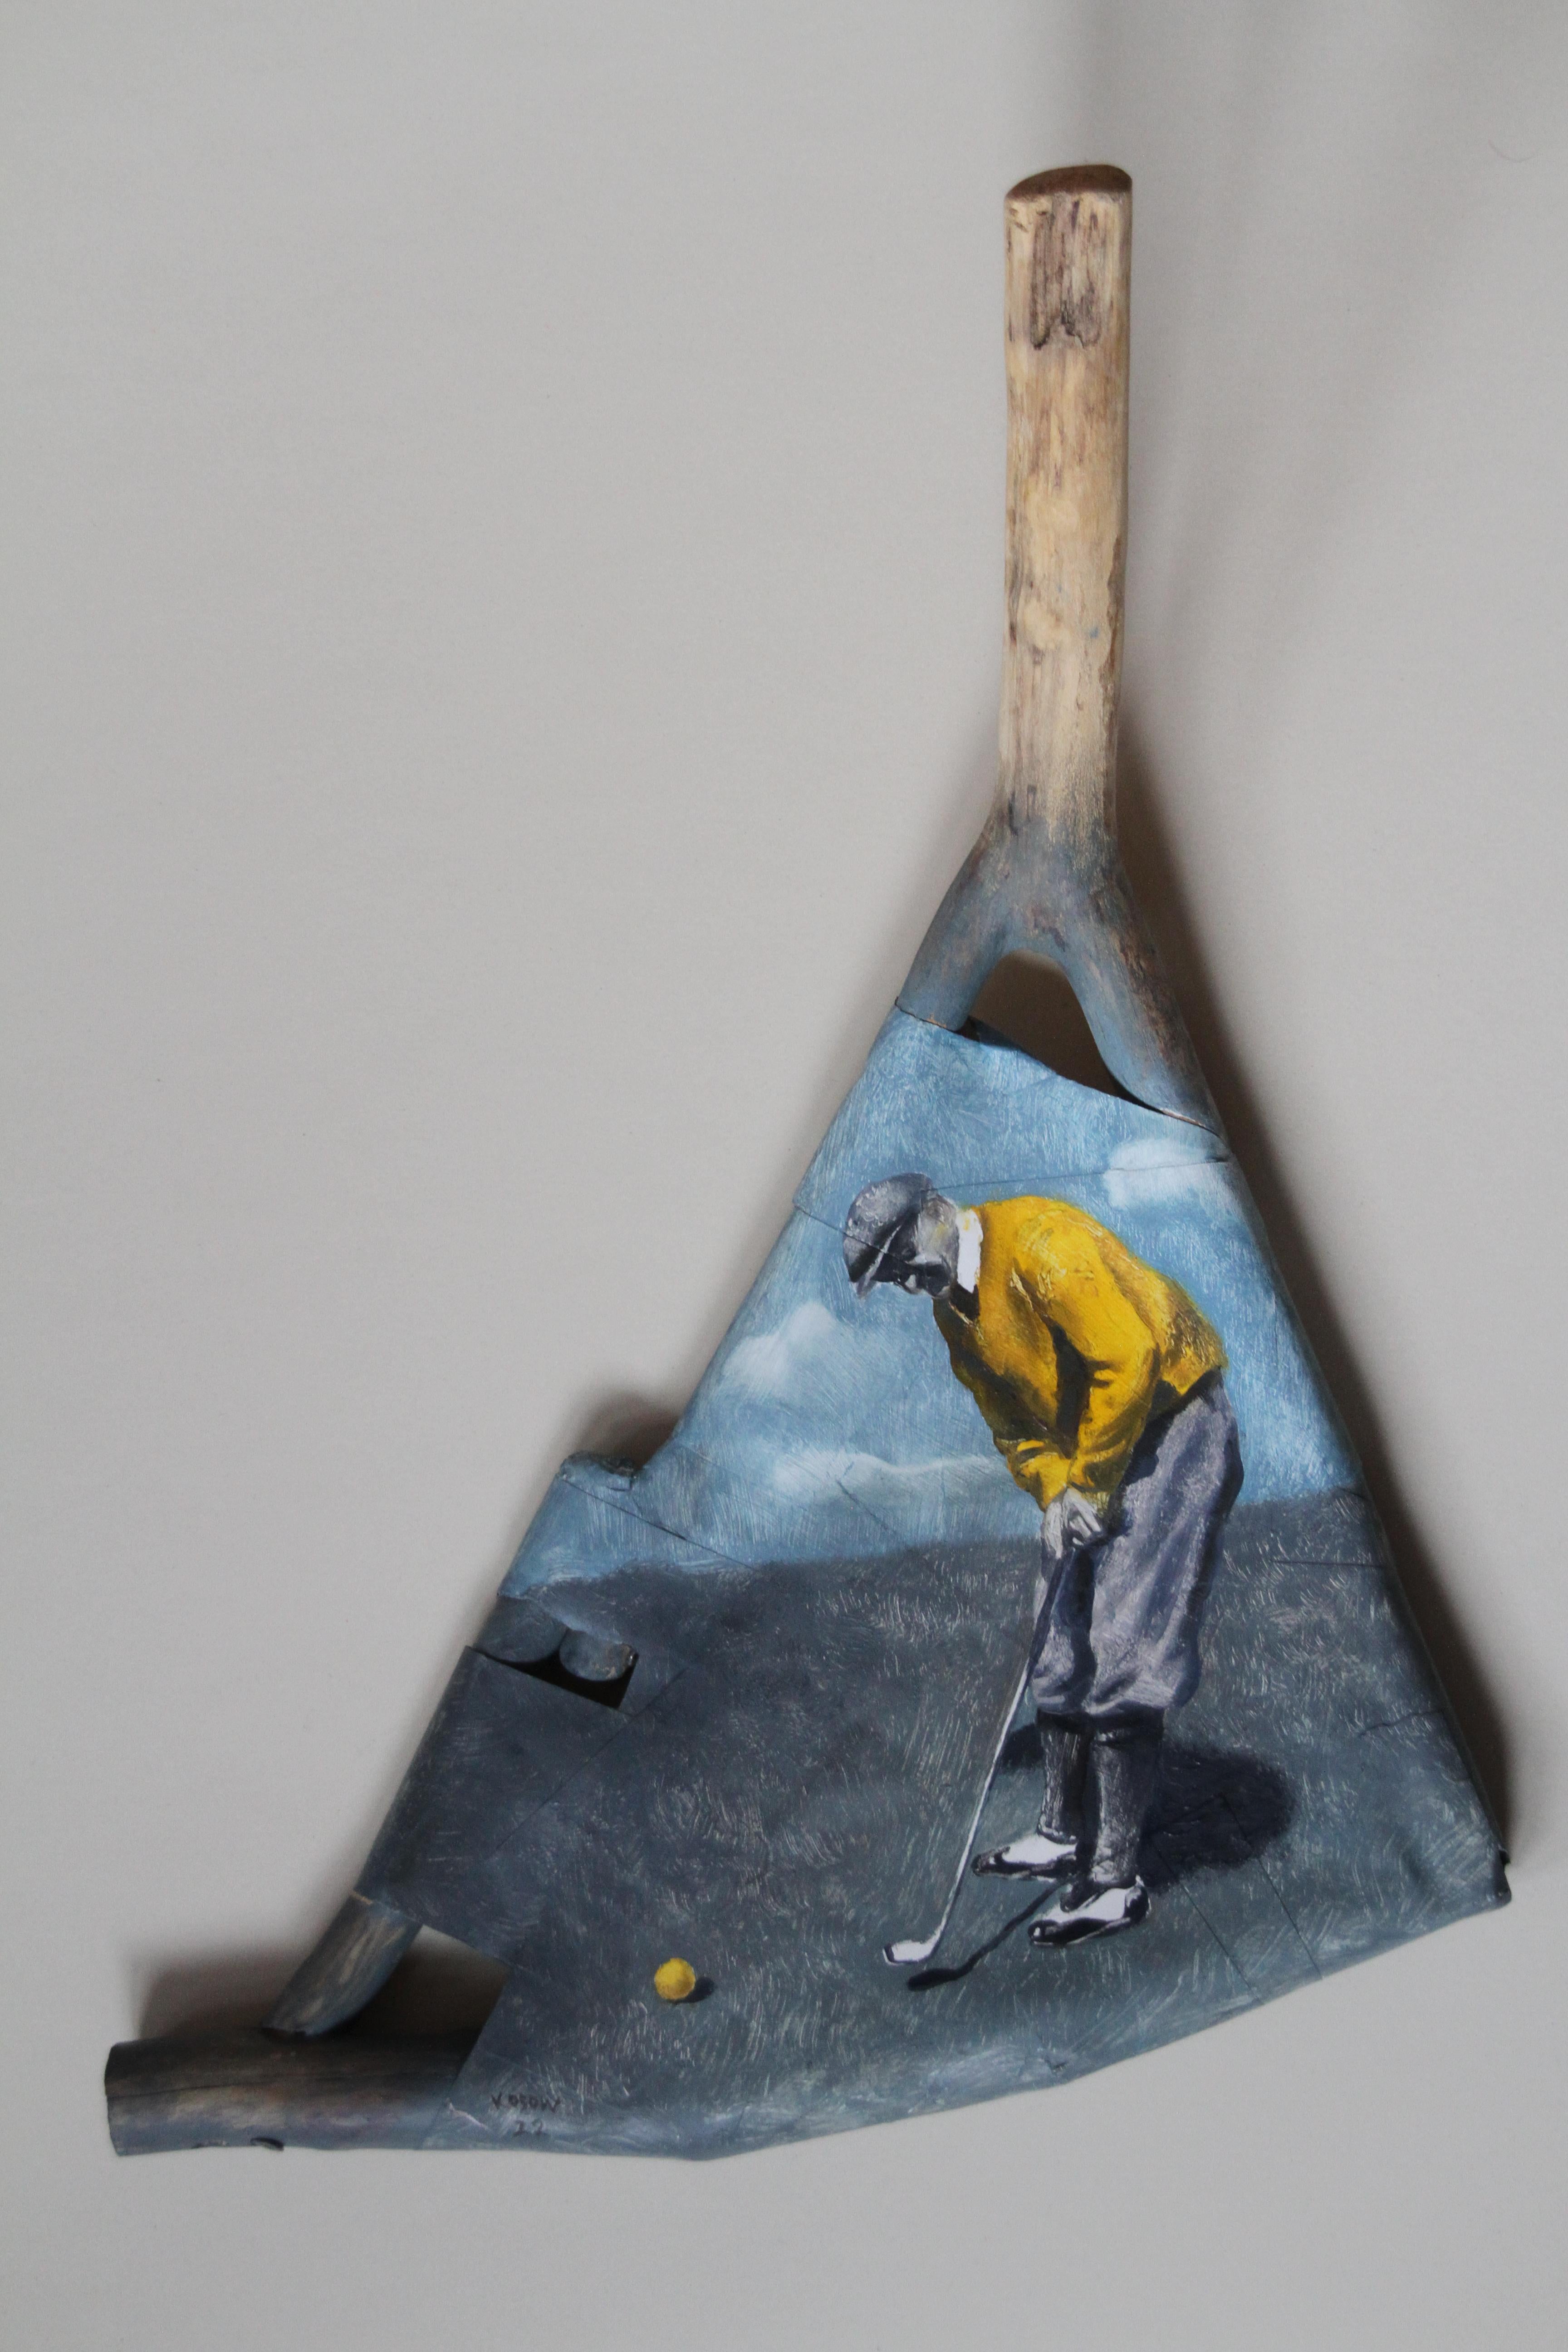 One more (vintage golfer yellow shirt wood painting sculpture tridimensional)